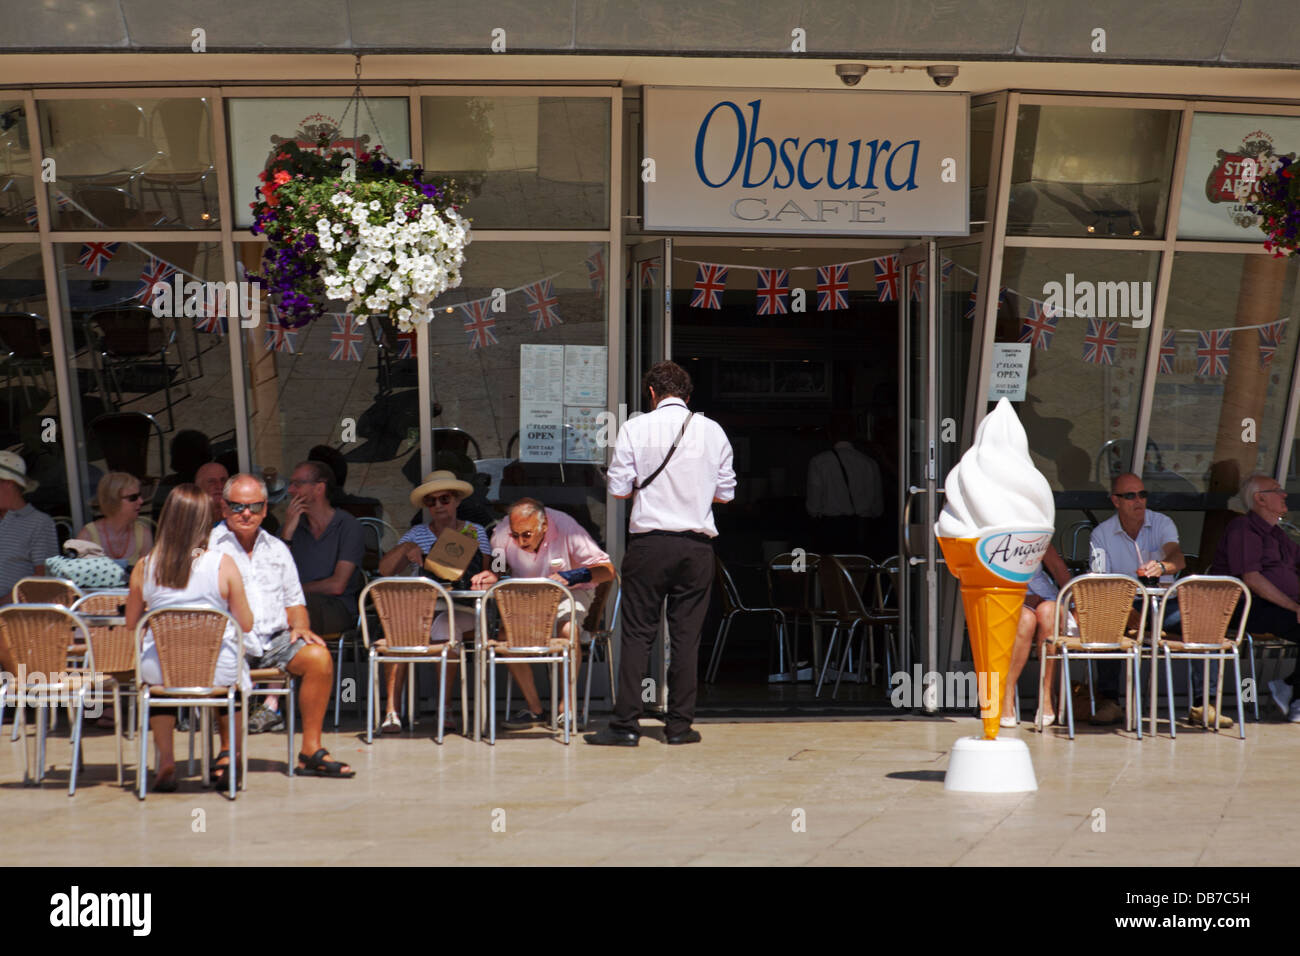 Obscura Cafe at Bournemouth Square in July Stock Photo